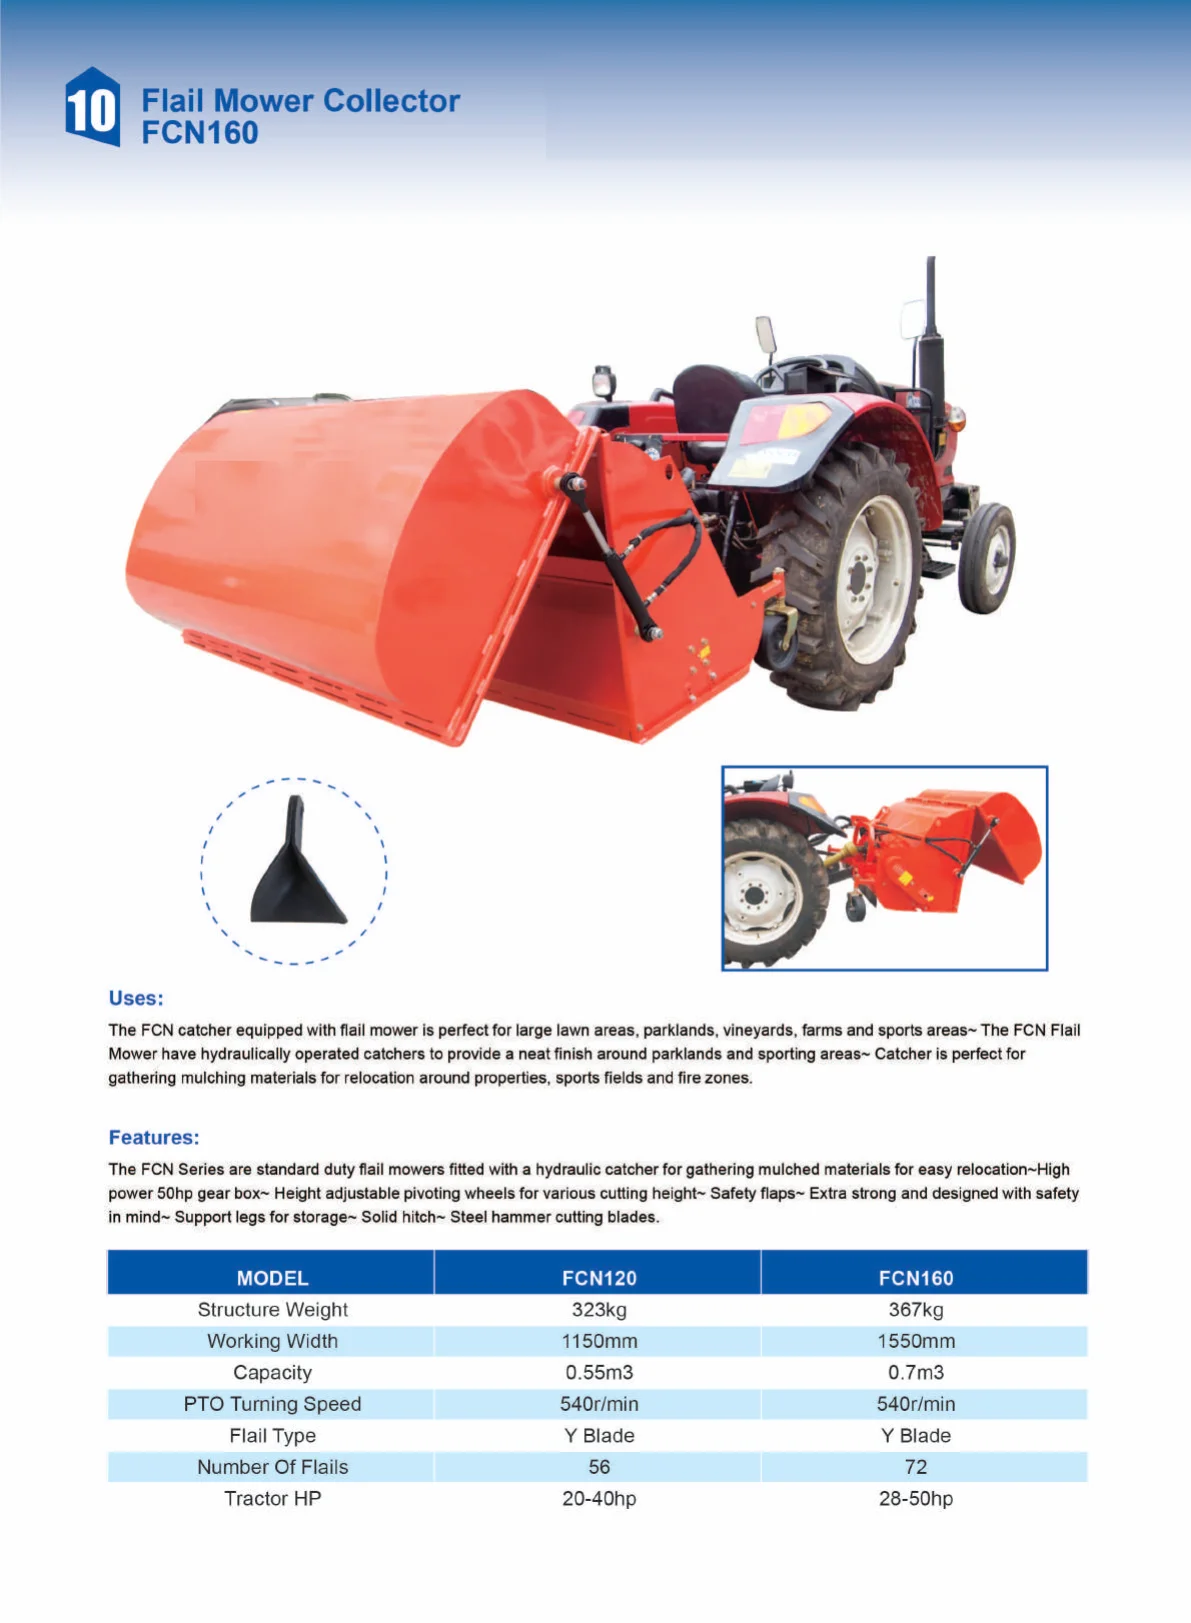 3 Point Flail Mower With Collector Buy Flail Mower Collector Side Flail Mower Flail Mower Product On Alibaba Com